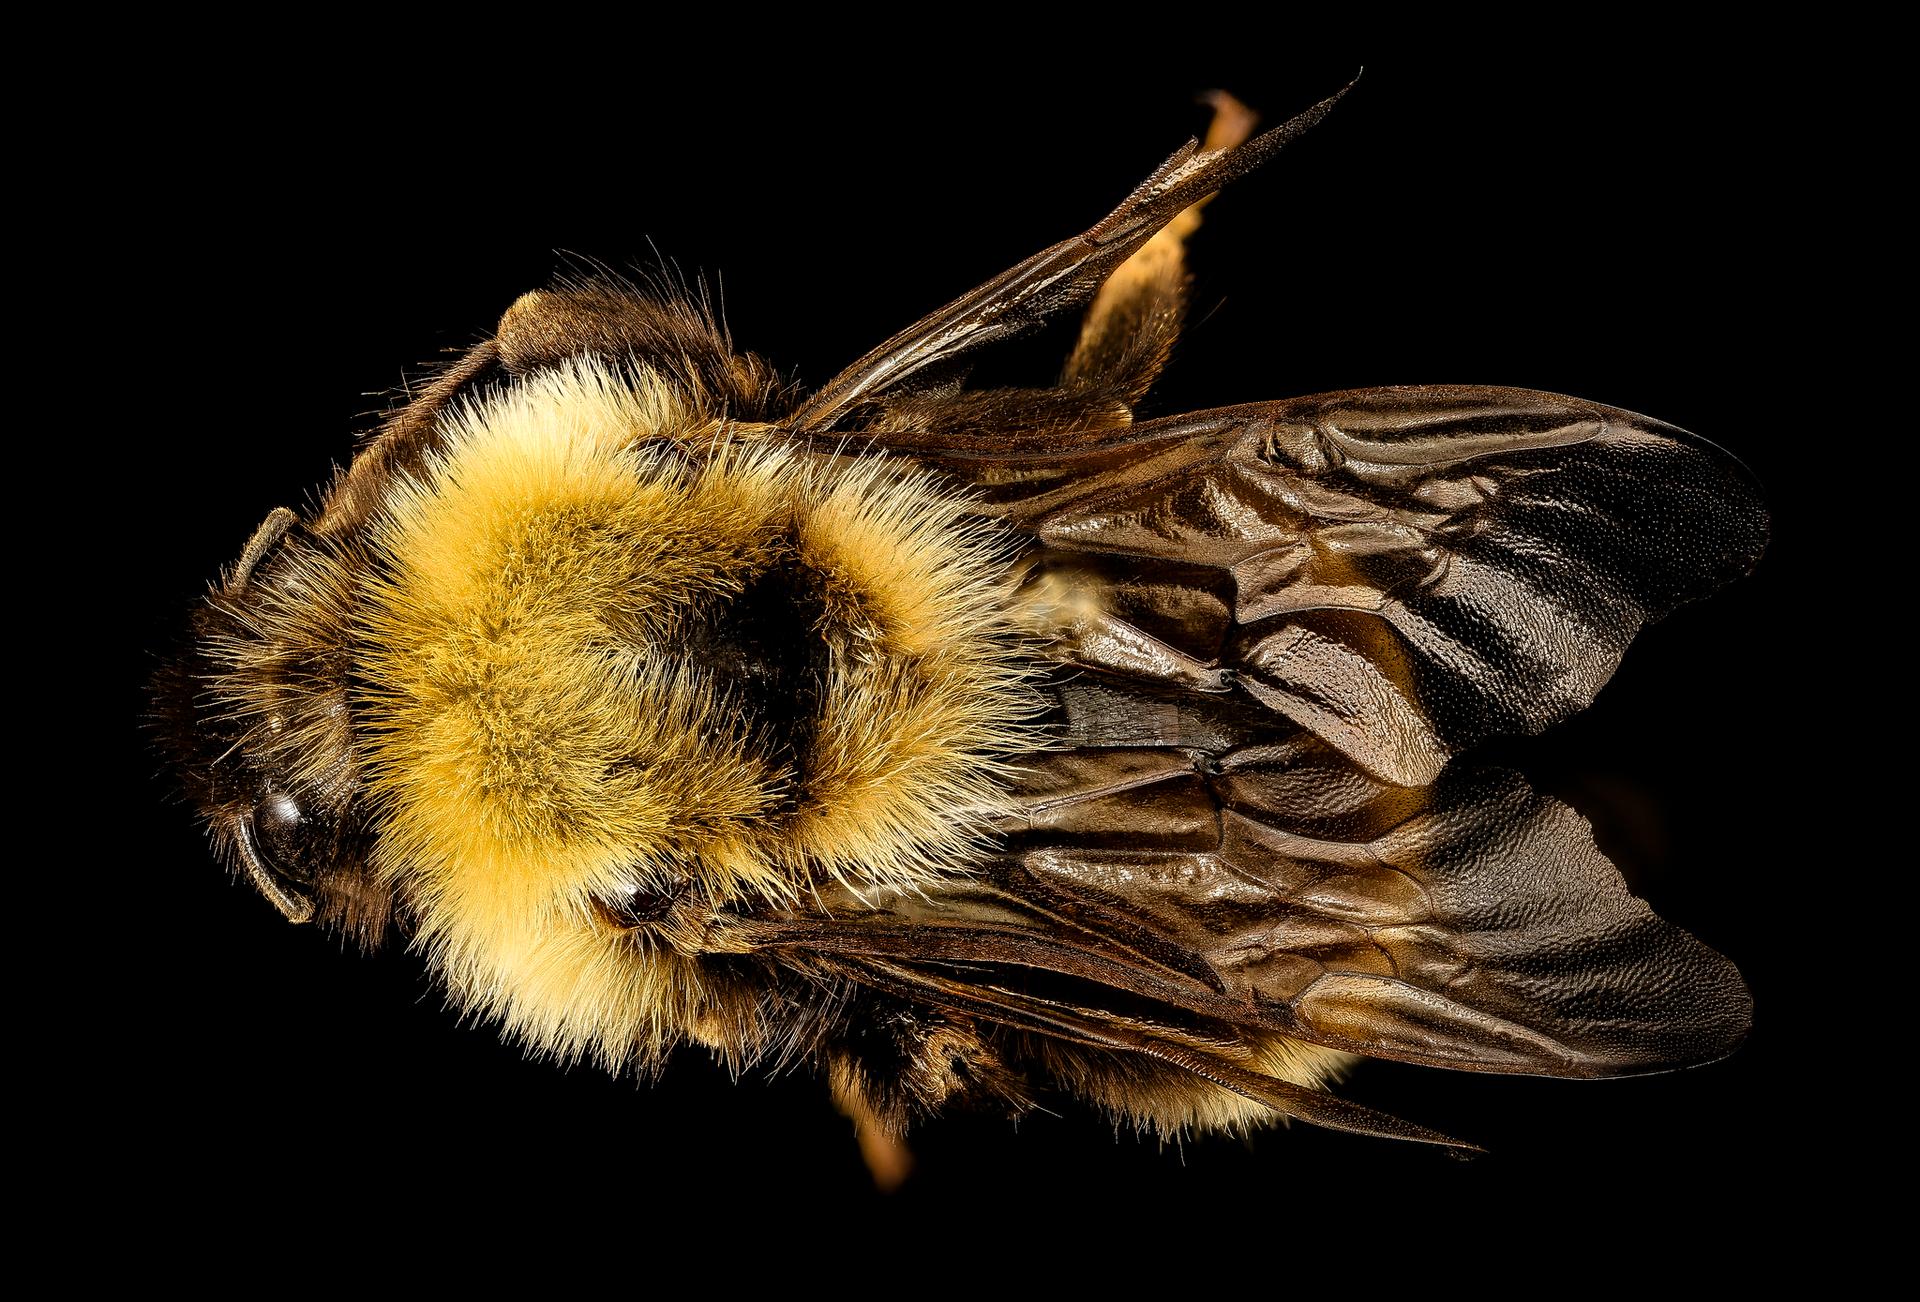 Bombus affinis, the rusty patched bumblebee.